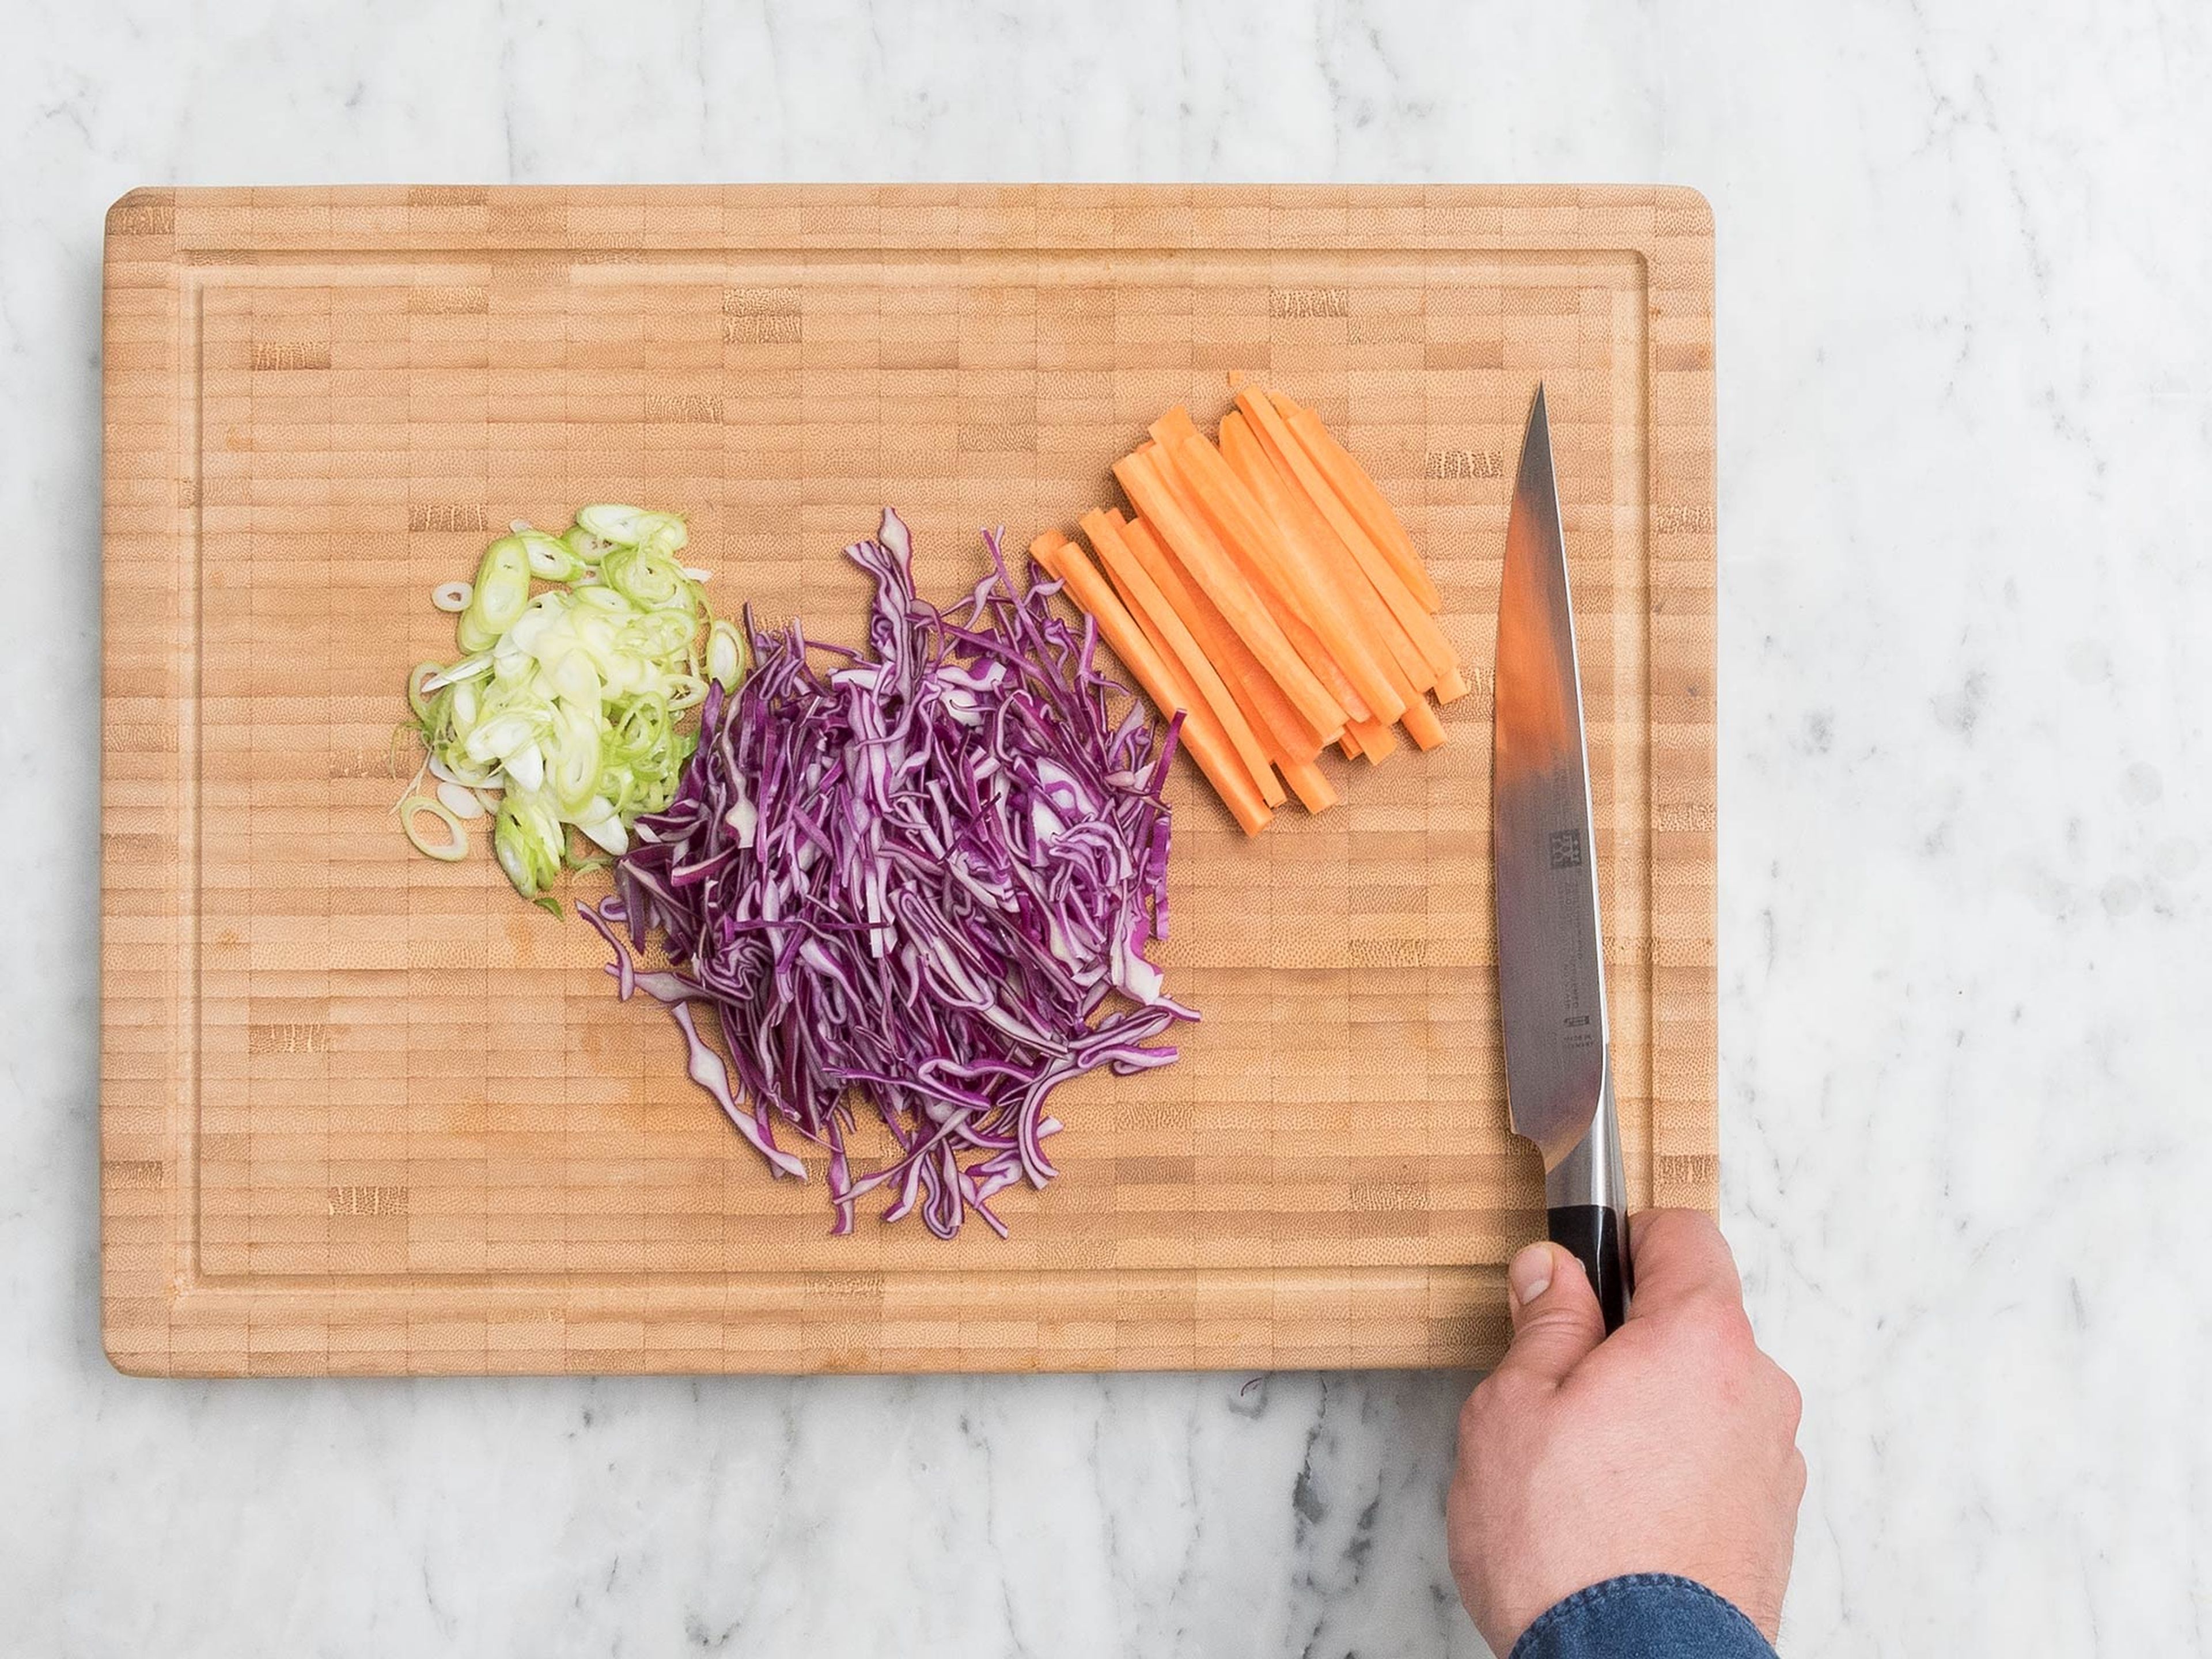 Add rice to pot, cover with water, and cook for approx. 12 – 15 min. Meanwhile, cut red cabbage into fine strips. Peel, halve, and julienne carrots. Slice green onions into thin rings.